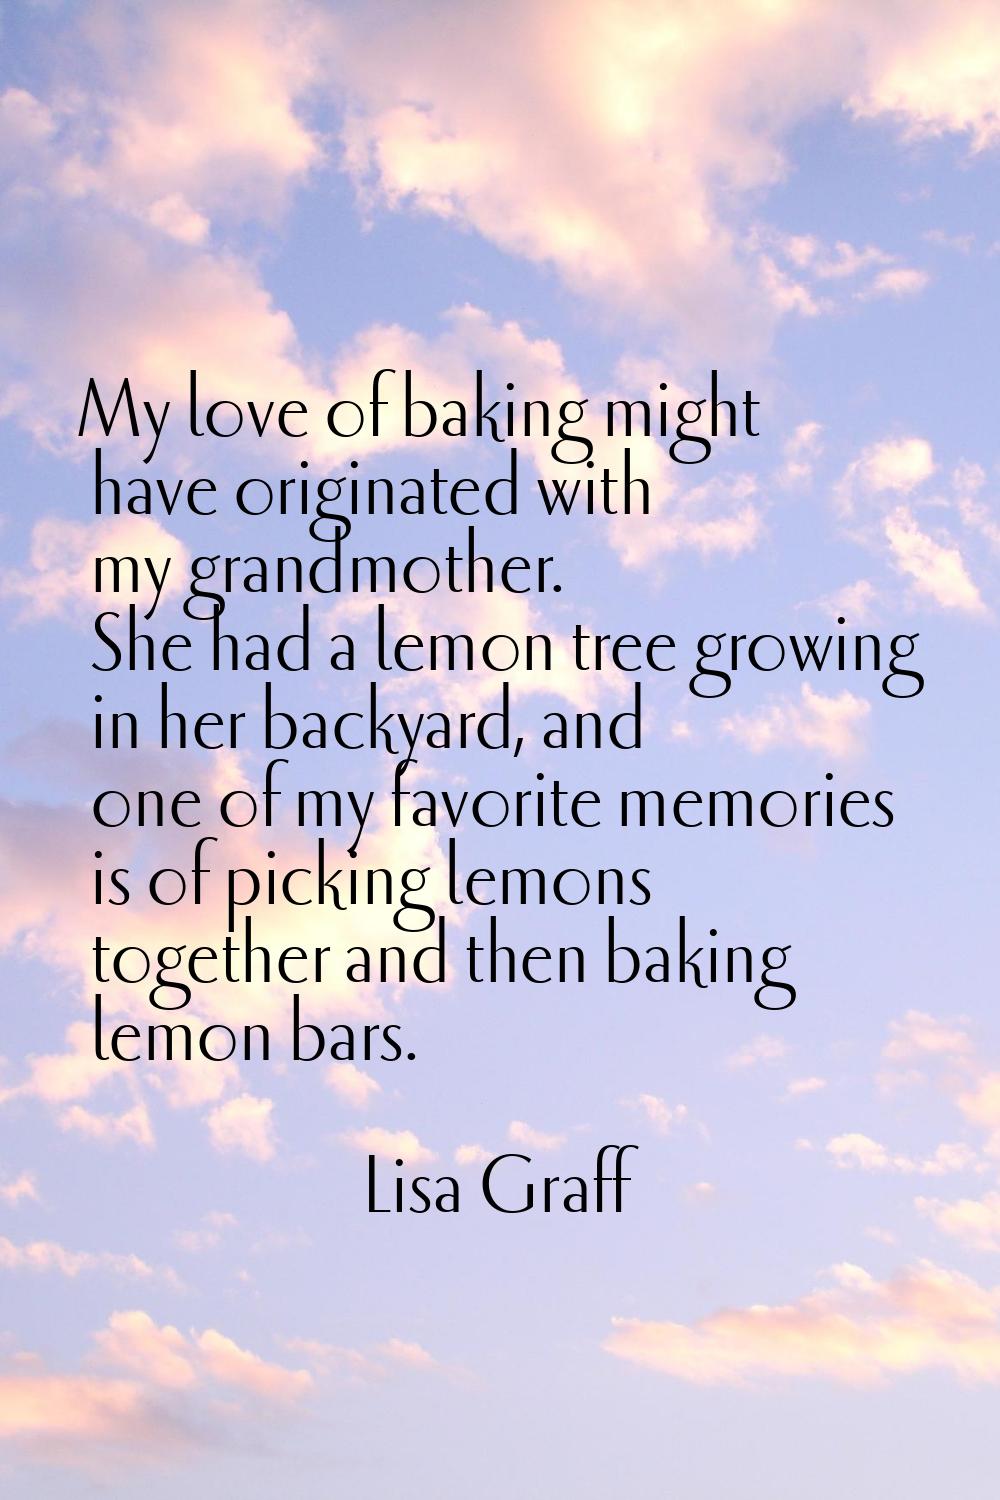 My love of baking might have originated with my grandmother. She had a lemon tree growing in her ba